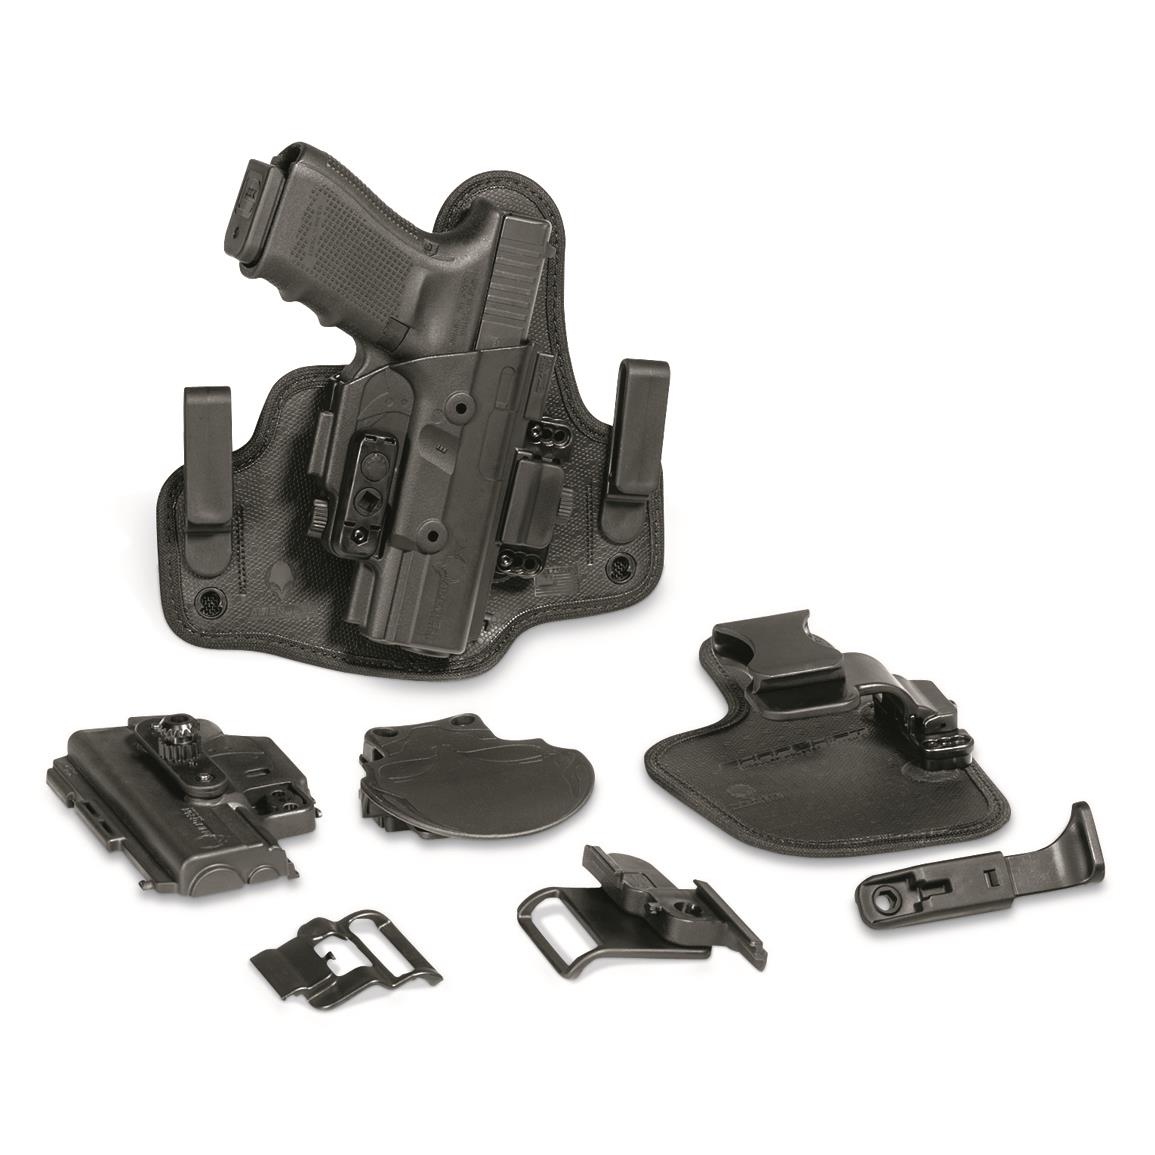 Alien Gear ShapeShift Holster Core Carry Pack, Springfield XD 4"